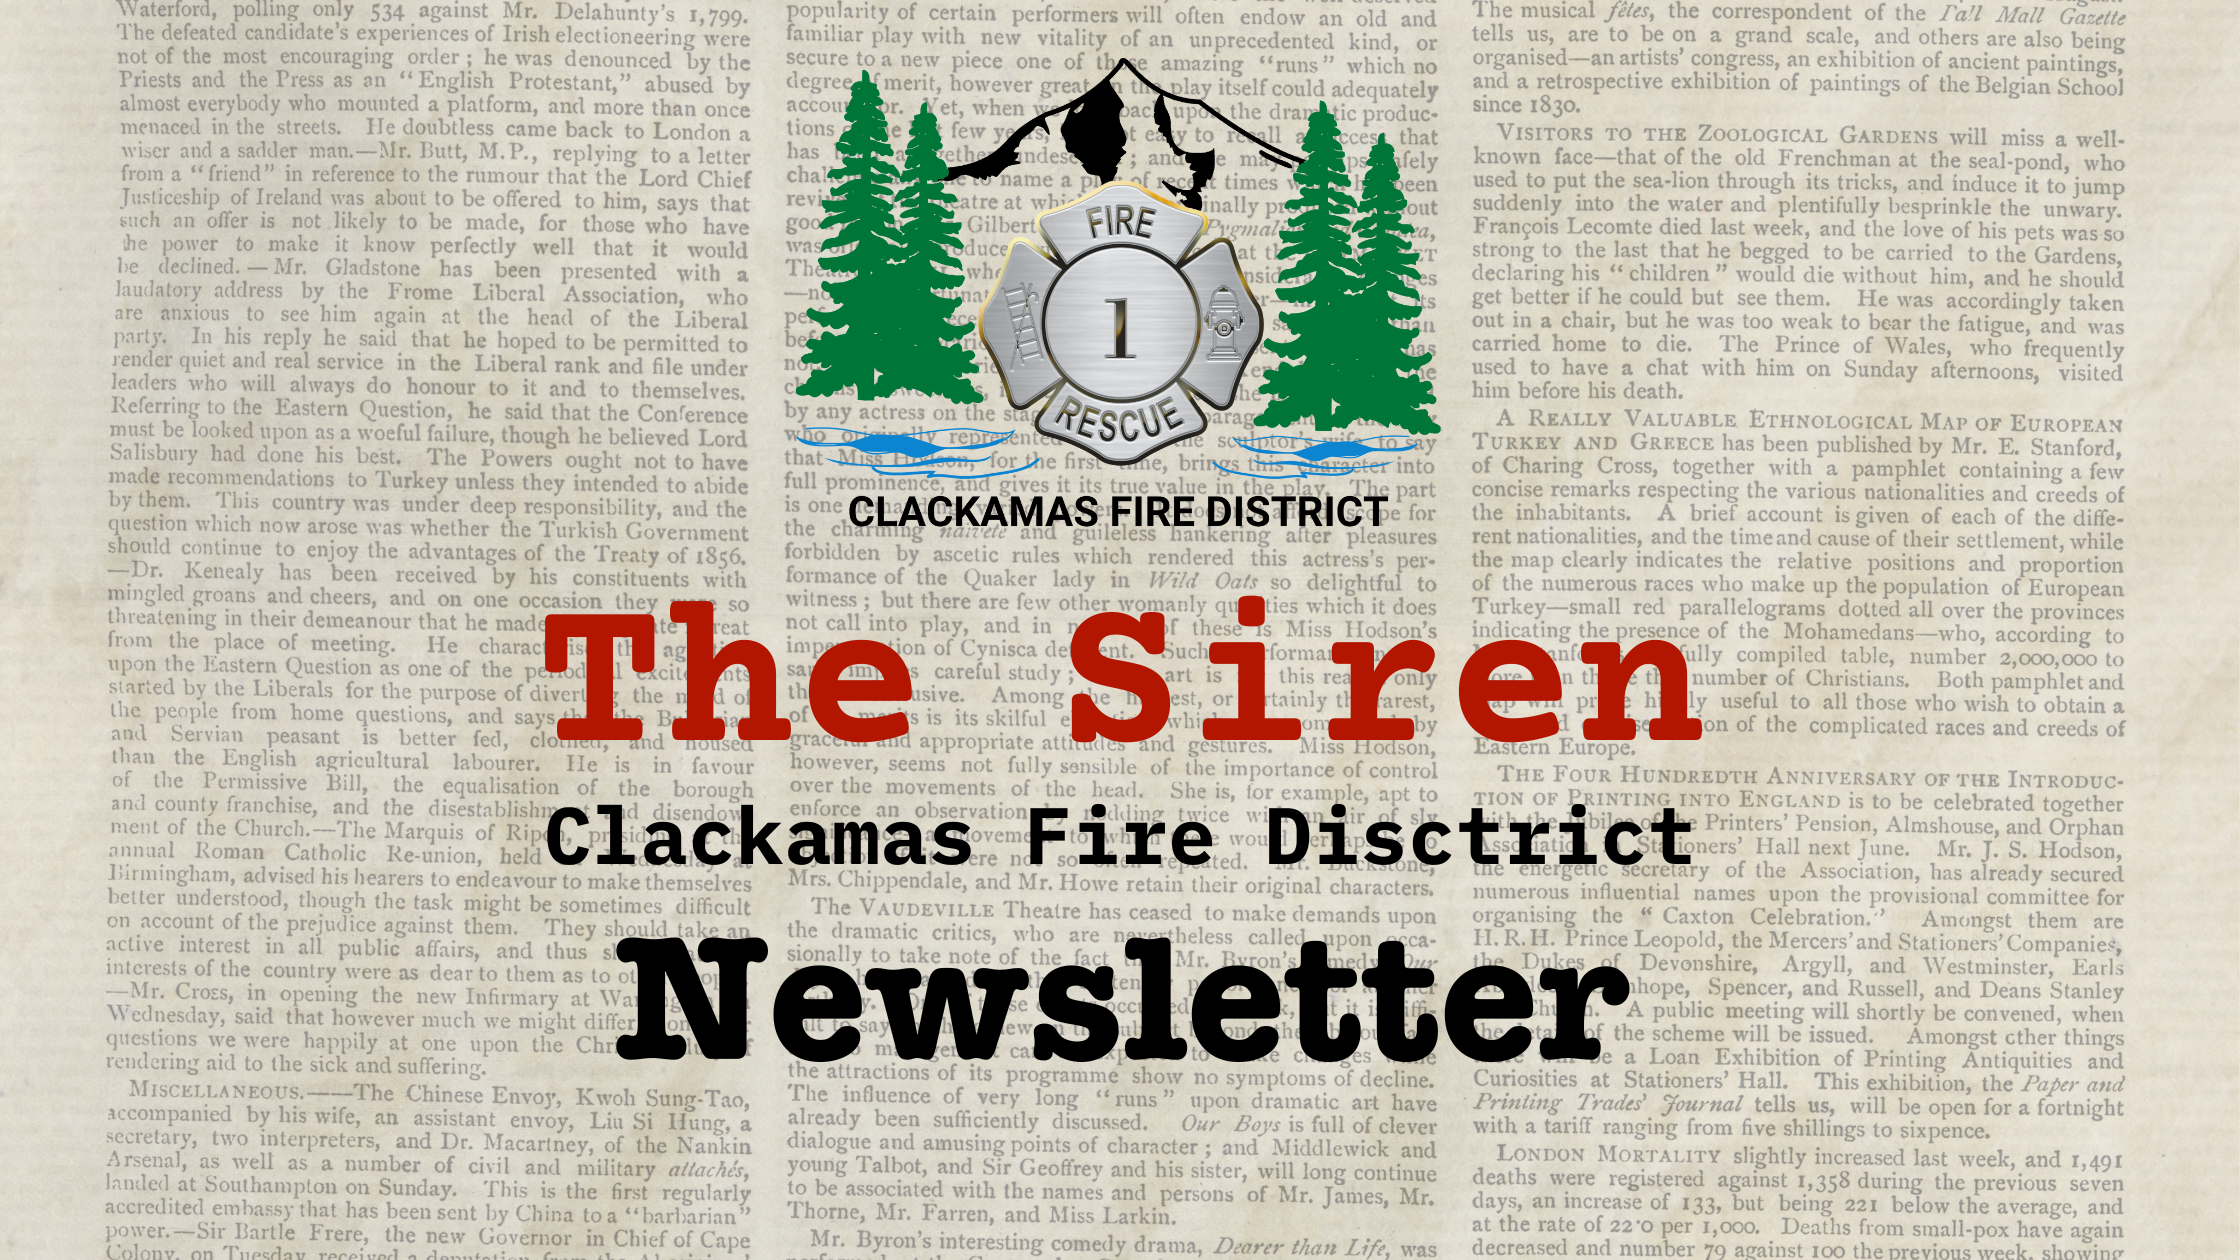 FIRE DISTRICT IMAGES The siren newsletter